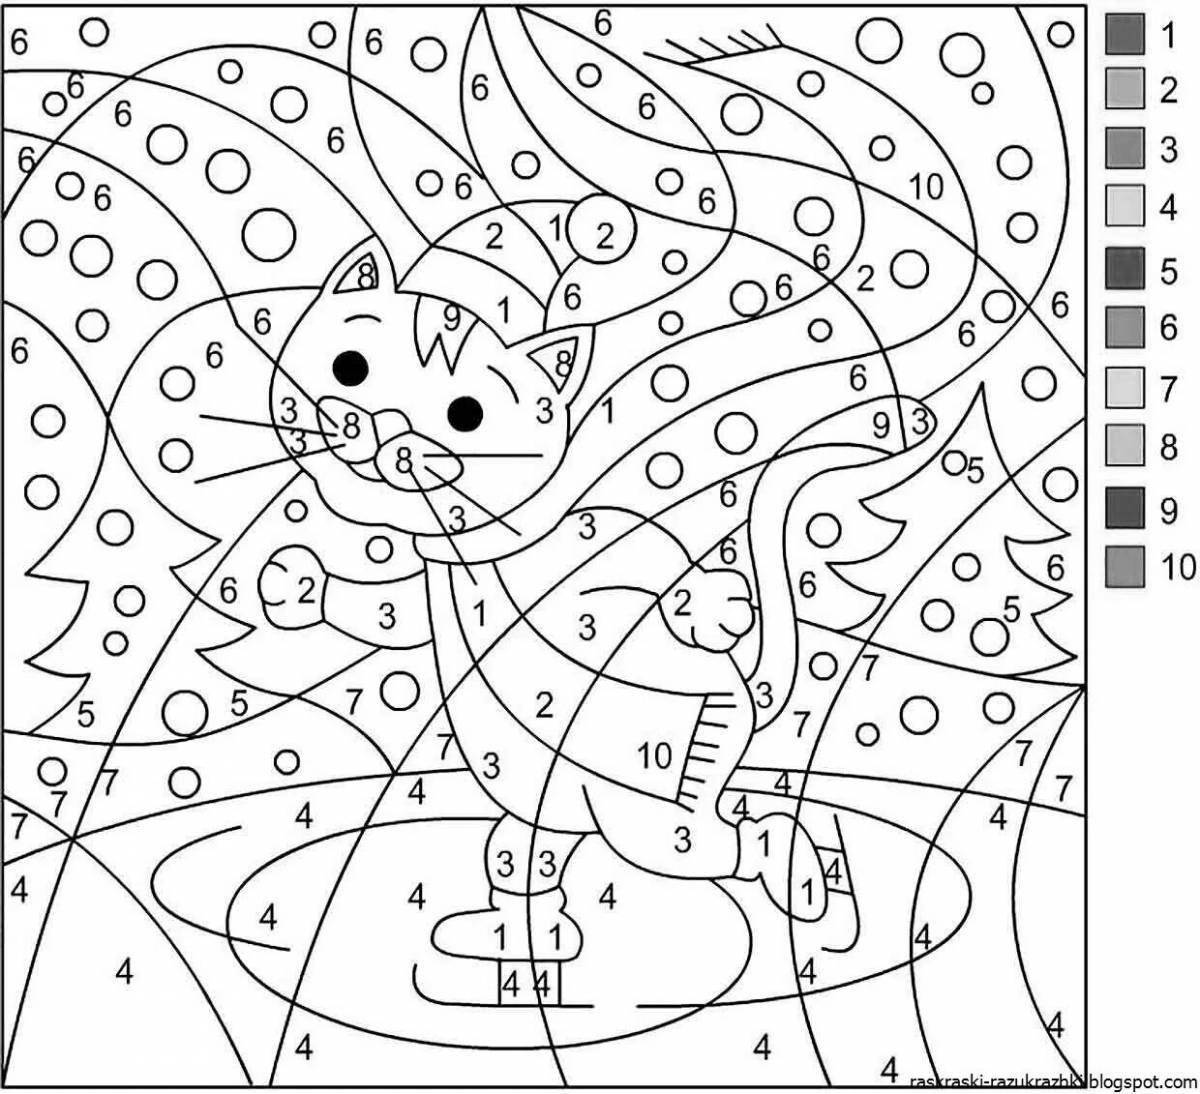 Cute animal coloring book for 6-7 year olds for girls